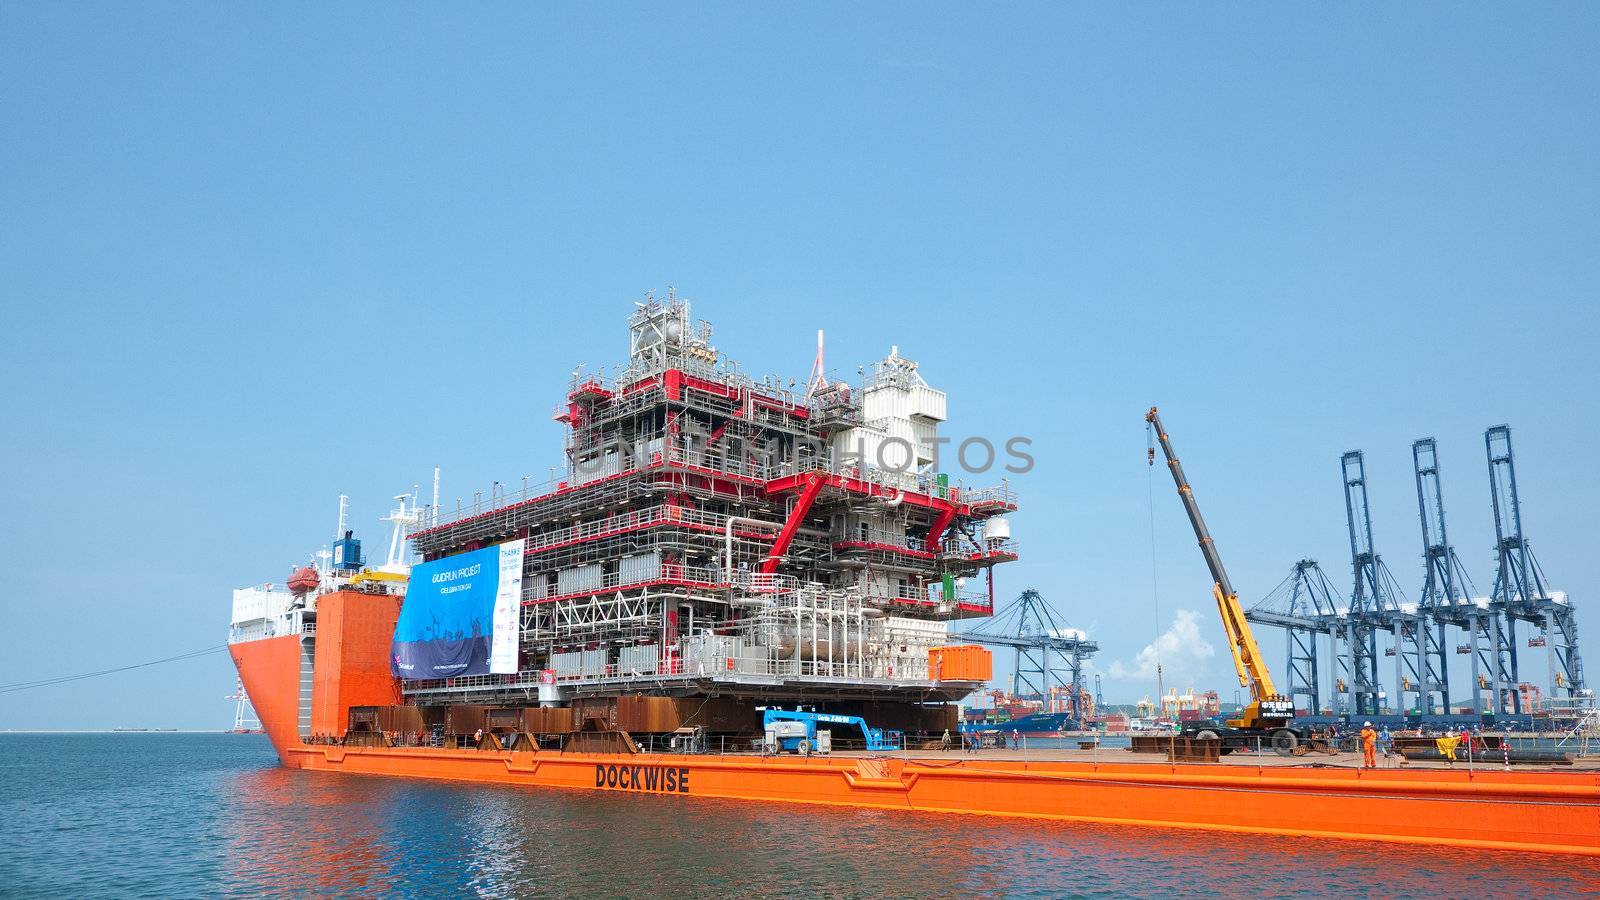 LAEM CHABANG - OCTOBER 3: A 6,000 ton module built by Aibel in Thailand for Statoil and the Gudrun Drilling Platform in the North Sea, ready for shipment in Laem Chabang, Thailand on October 3, 2012.